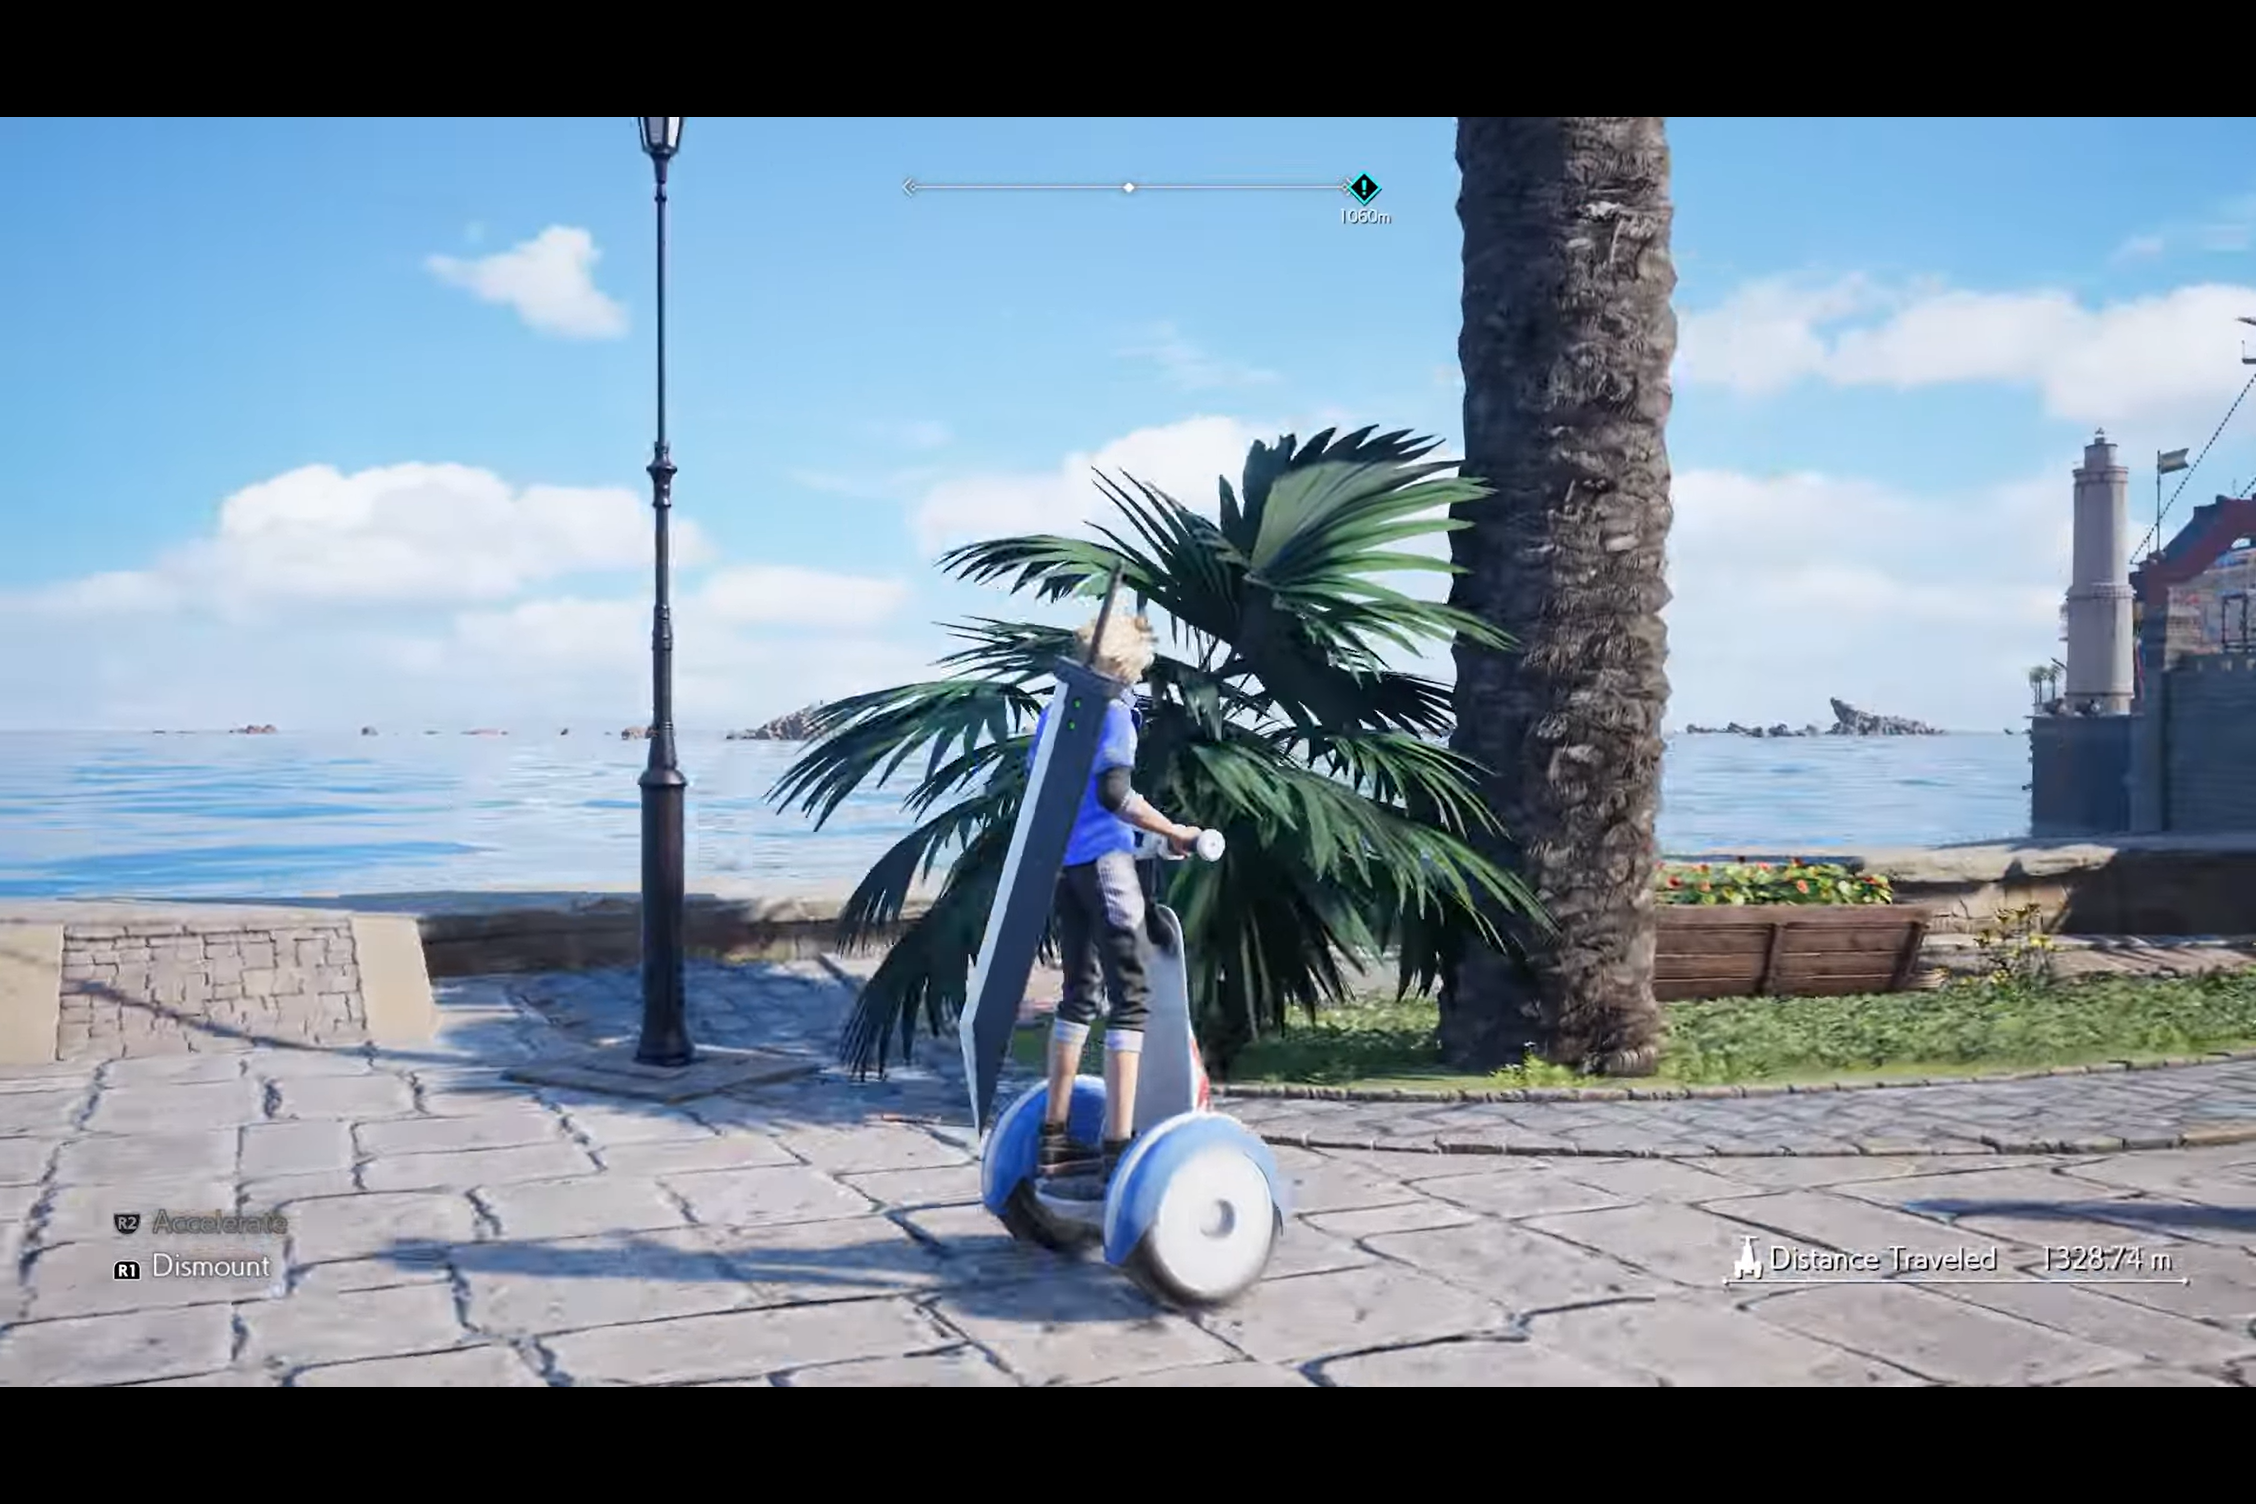 Cloud Strife riding a Segway near the water